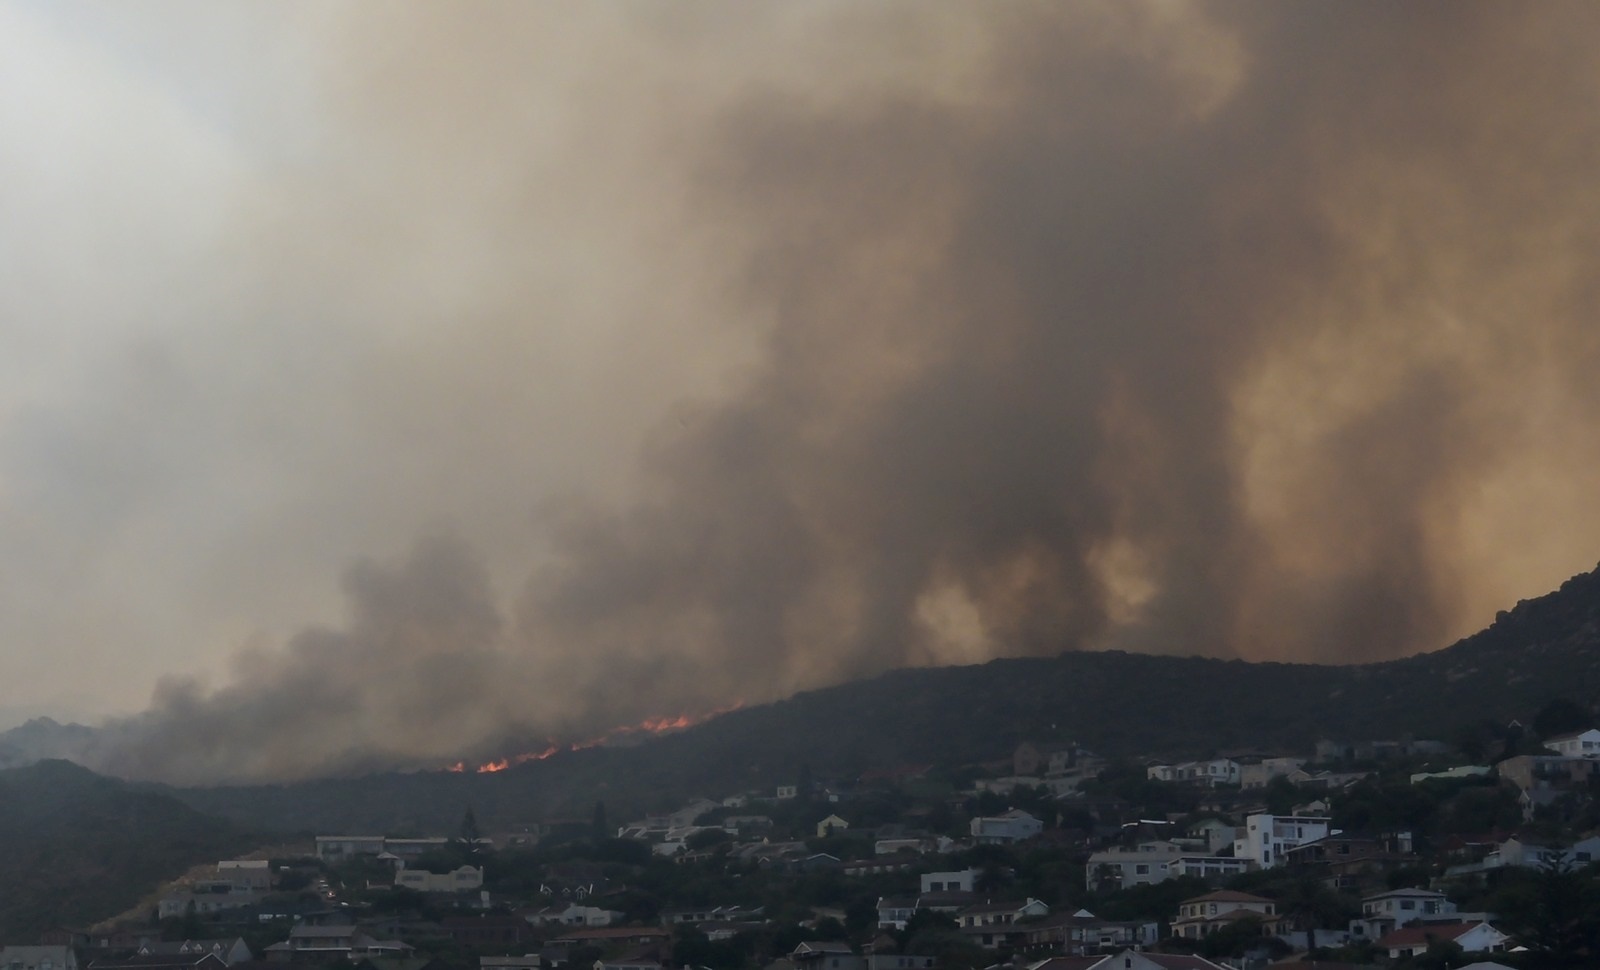 Rate of fires 'staggering' as City of Cape Town's fire services battle more than 1000 fires